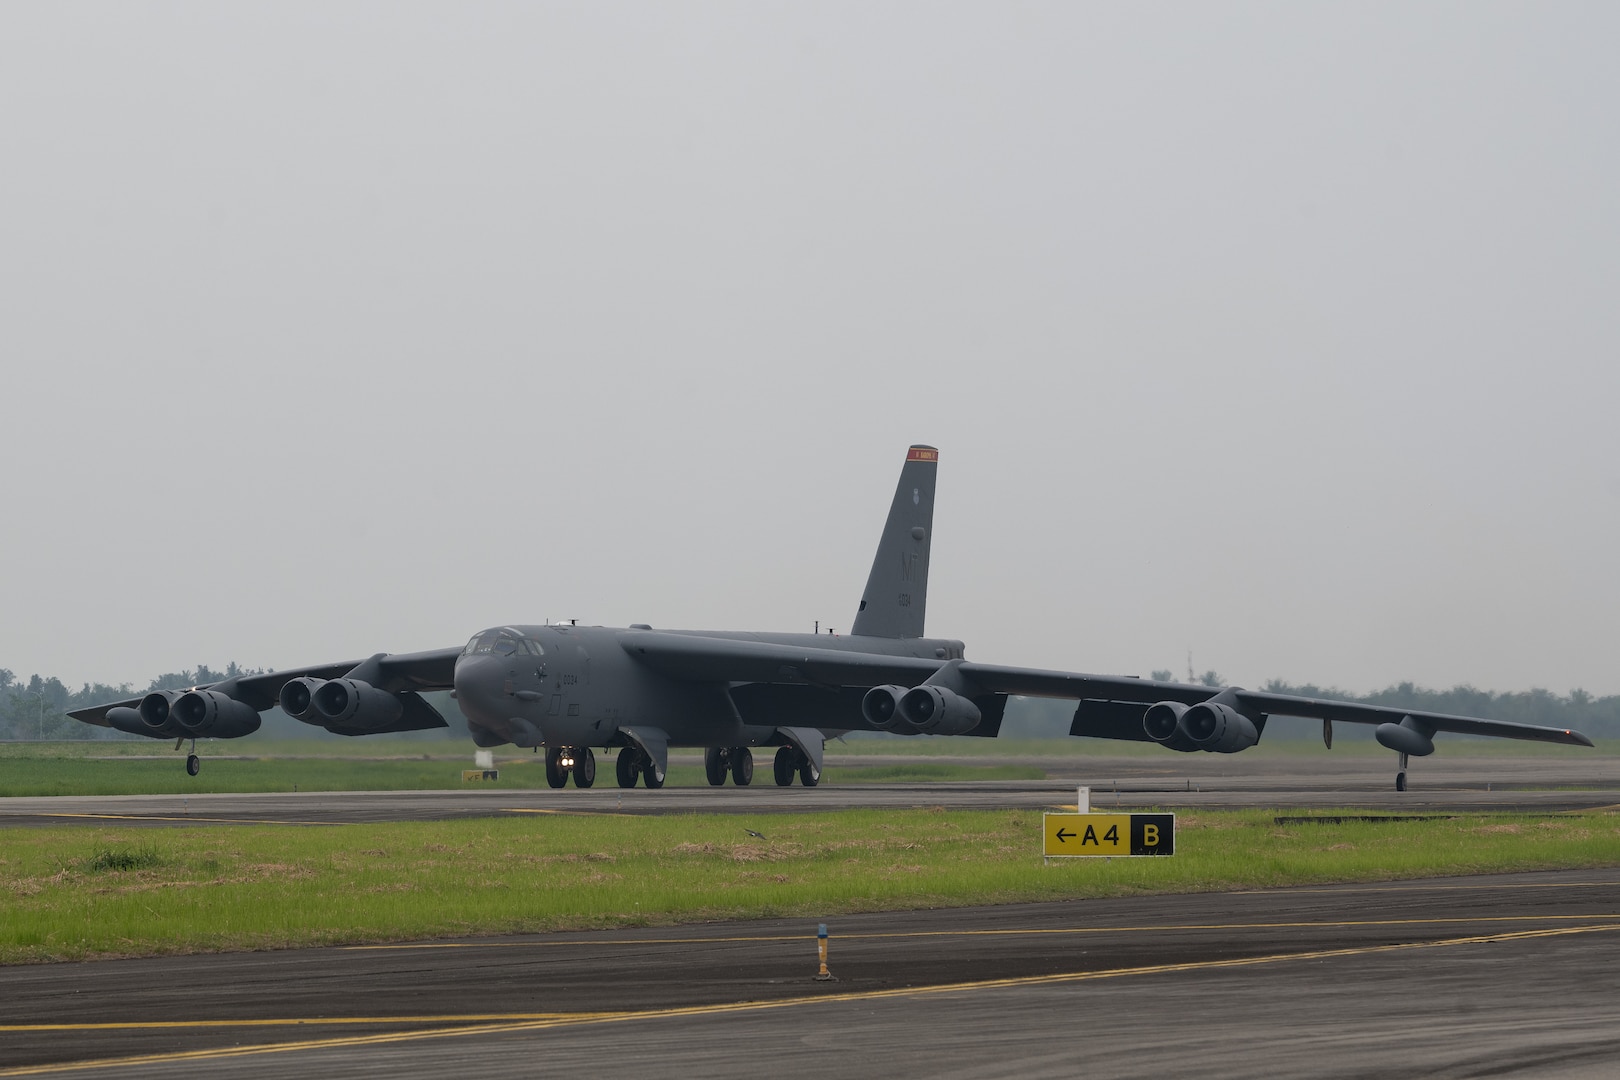 A U.S. Air Force B-52H Stratofortress assigned to the 23rd Bomb Squadron at Minot Air Force Base, North Dakota, prepares to take off in support of a bilateral military training exercise at the Kualanamu International Airport in Medan, Indonesia, June 21, 2023. Bomber deployments and operations enhance the readiness and training necessary to respond to any contingency or challenge across the globe. This particular training flight marked the first time a U.S. Air Force B-52 had taken off from Indonesian soil. (U.S. Air Force photo by Tech. Sgt. Zade Vadnais)